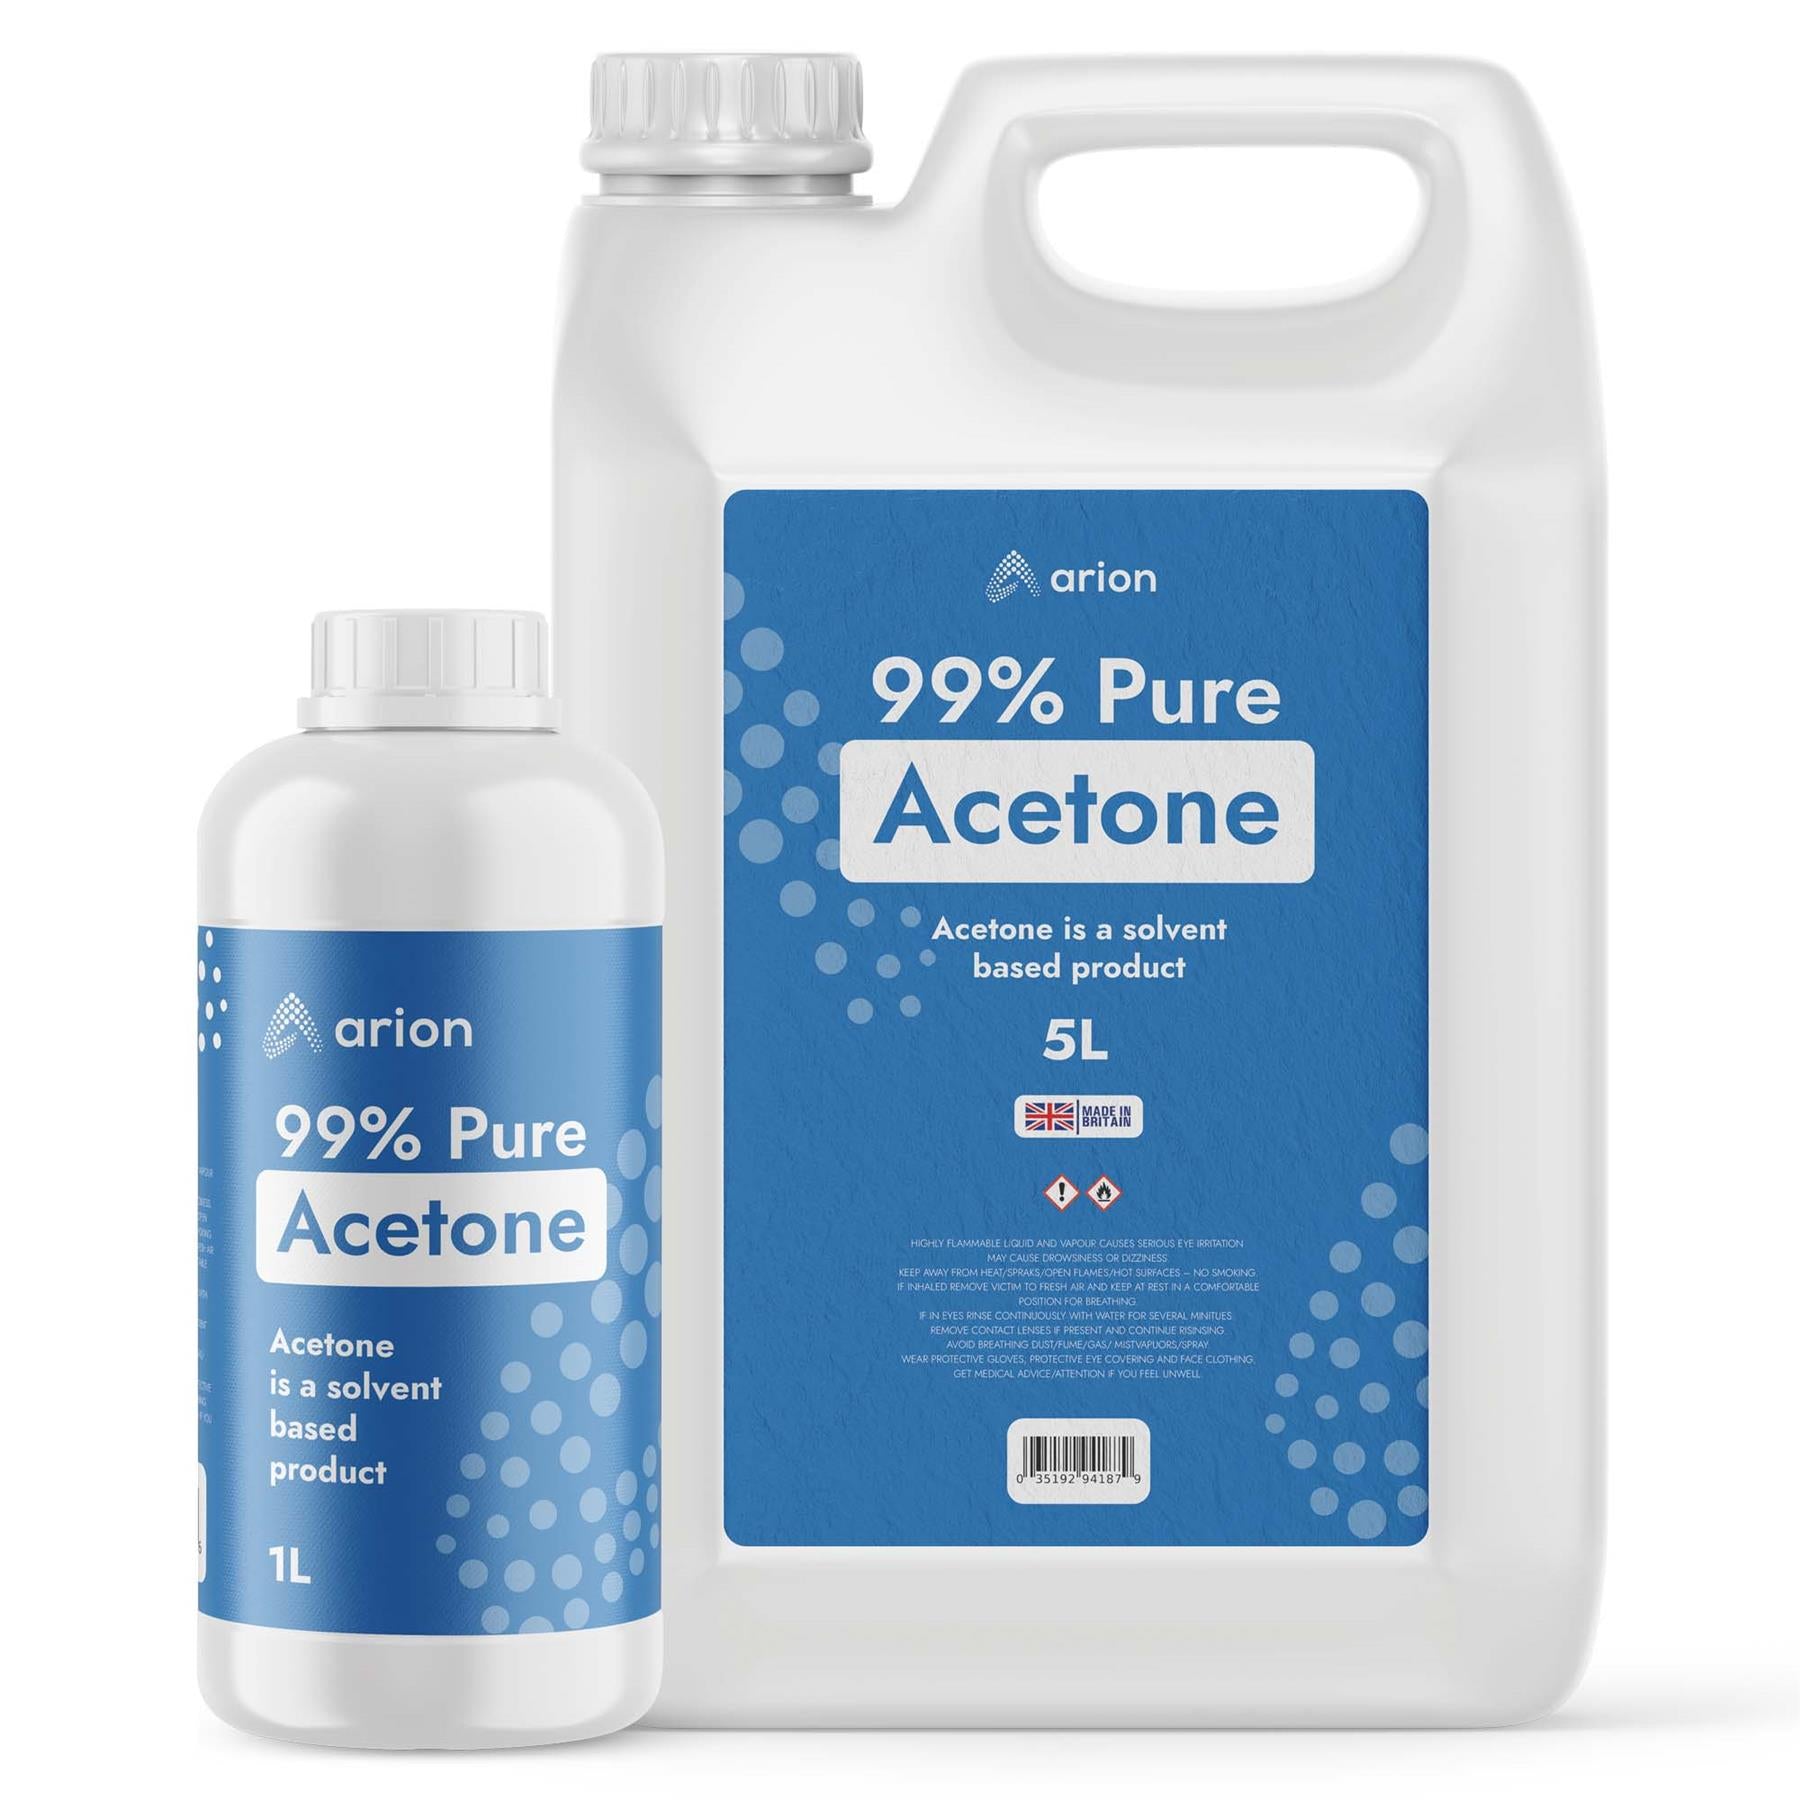 Arion Pure Acetone - Just Horse Riders